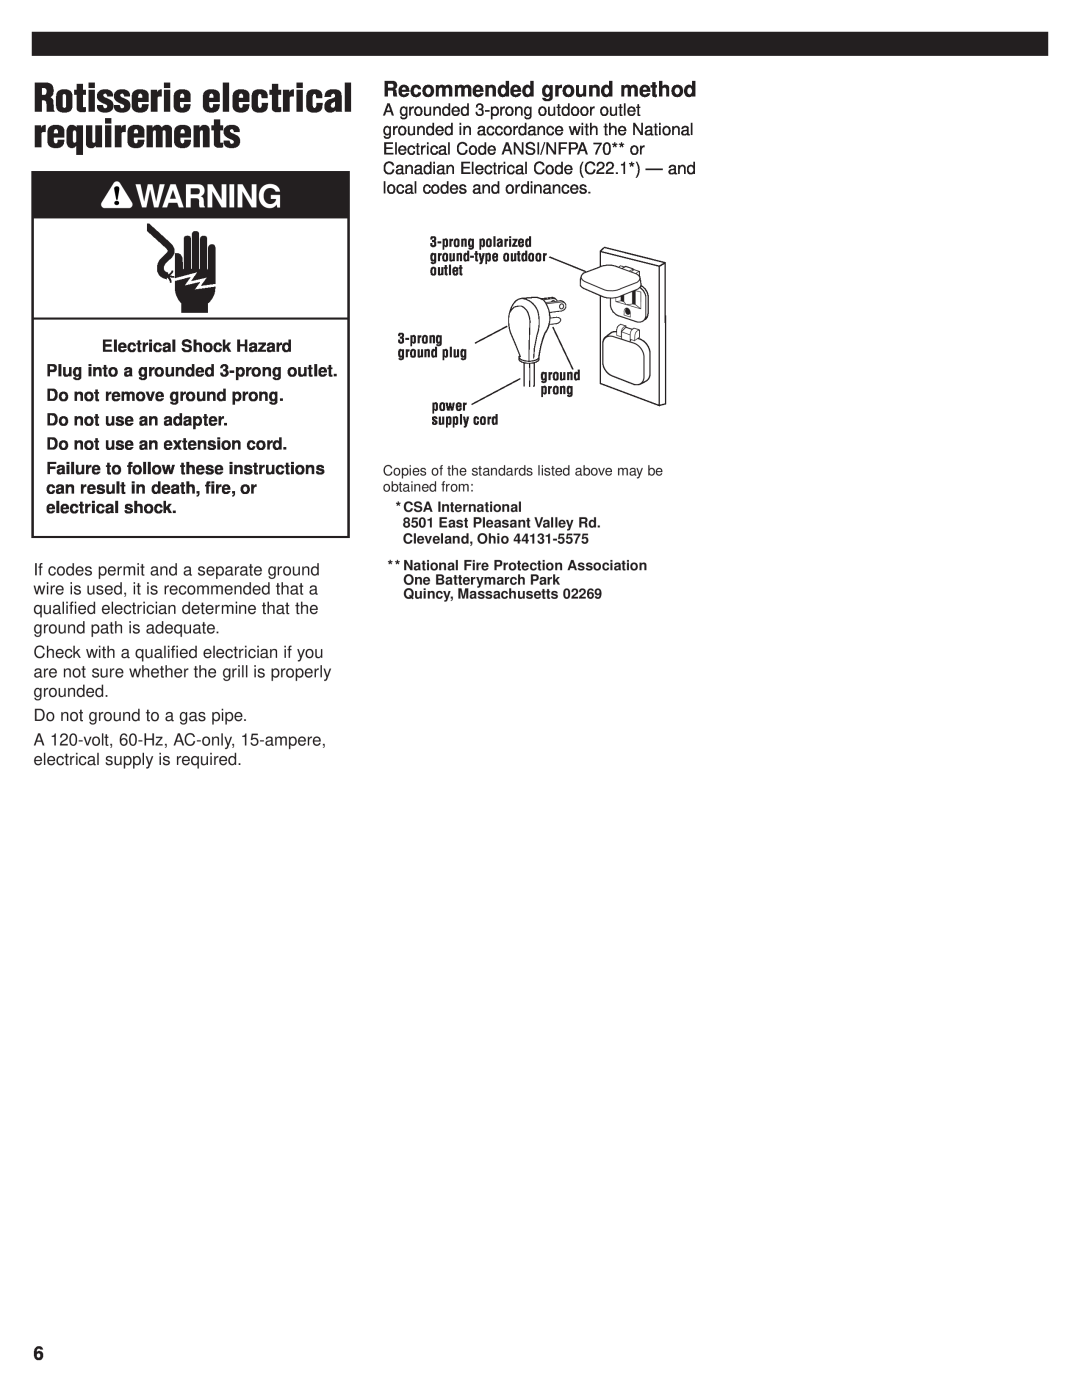 KitchenAid KBGN364, KFGR382 Rotisserie electrical requirements, Recommended ground method, Do not use an extension cord 